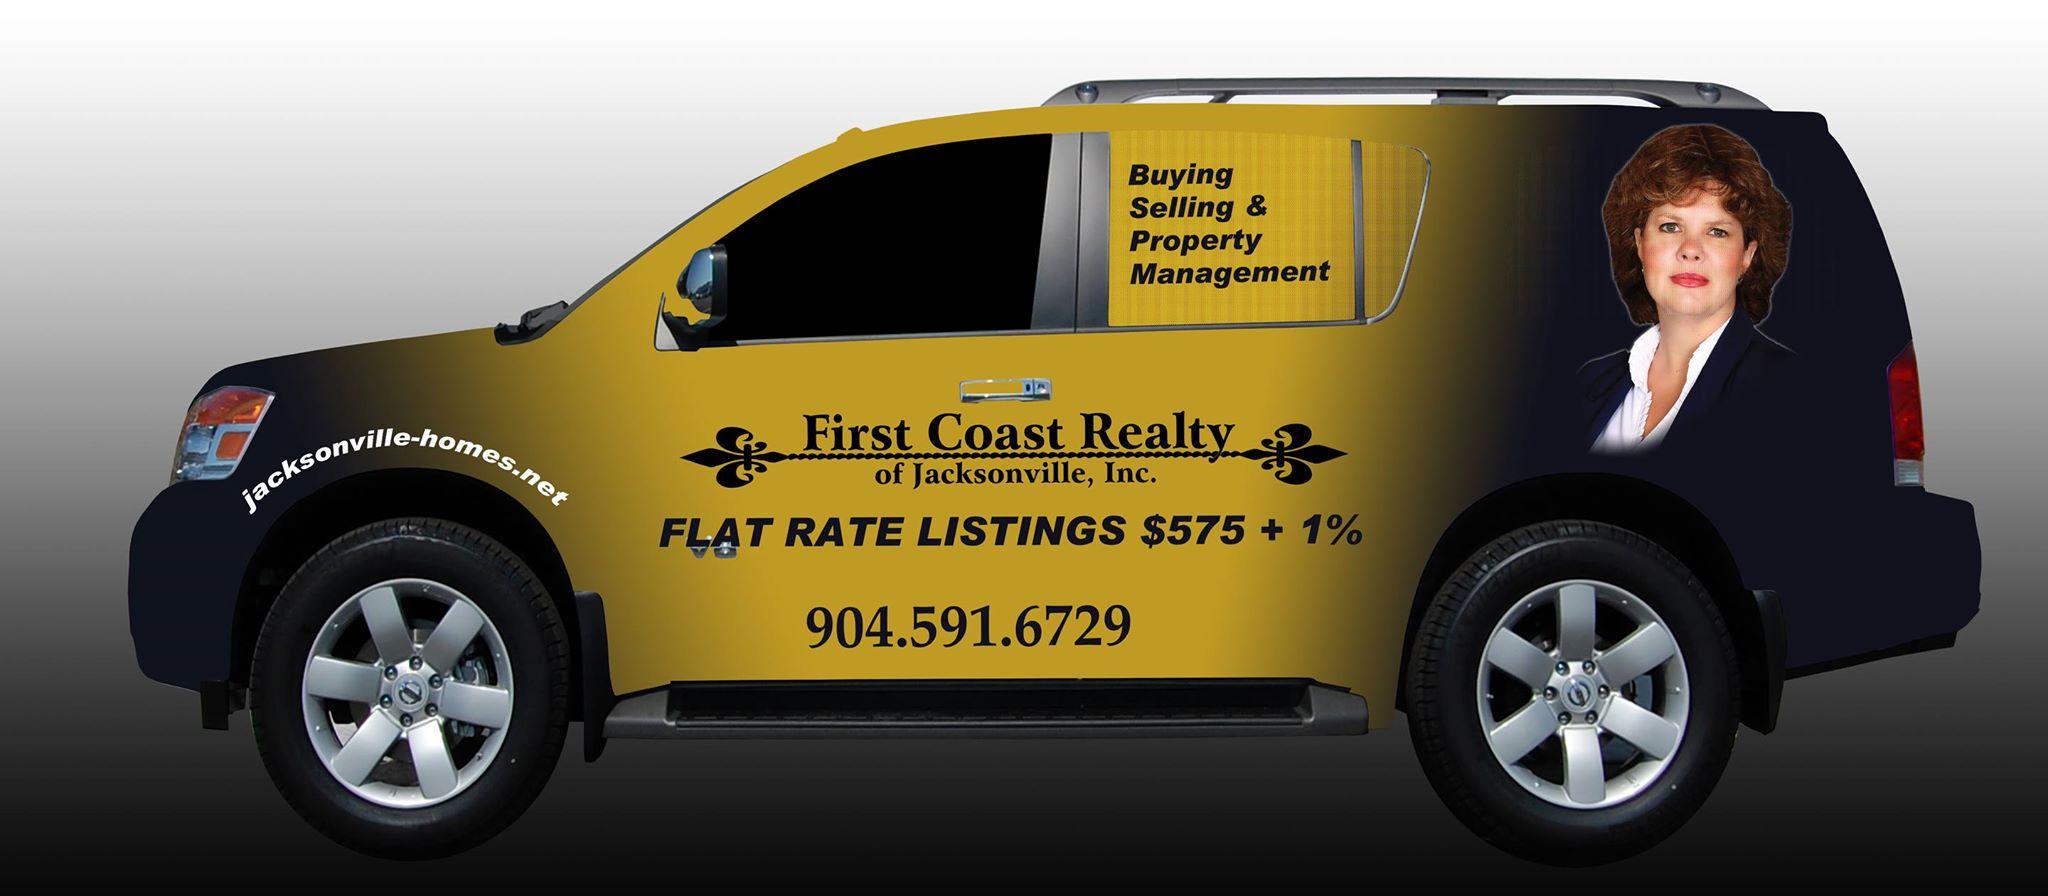 First Coast Realty of Jacksonville, Inc. Photo